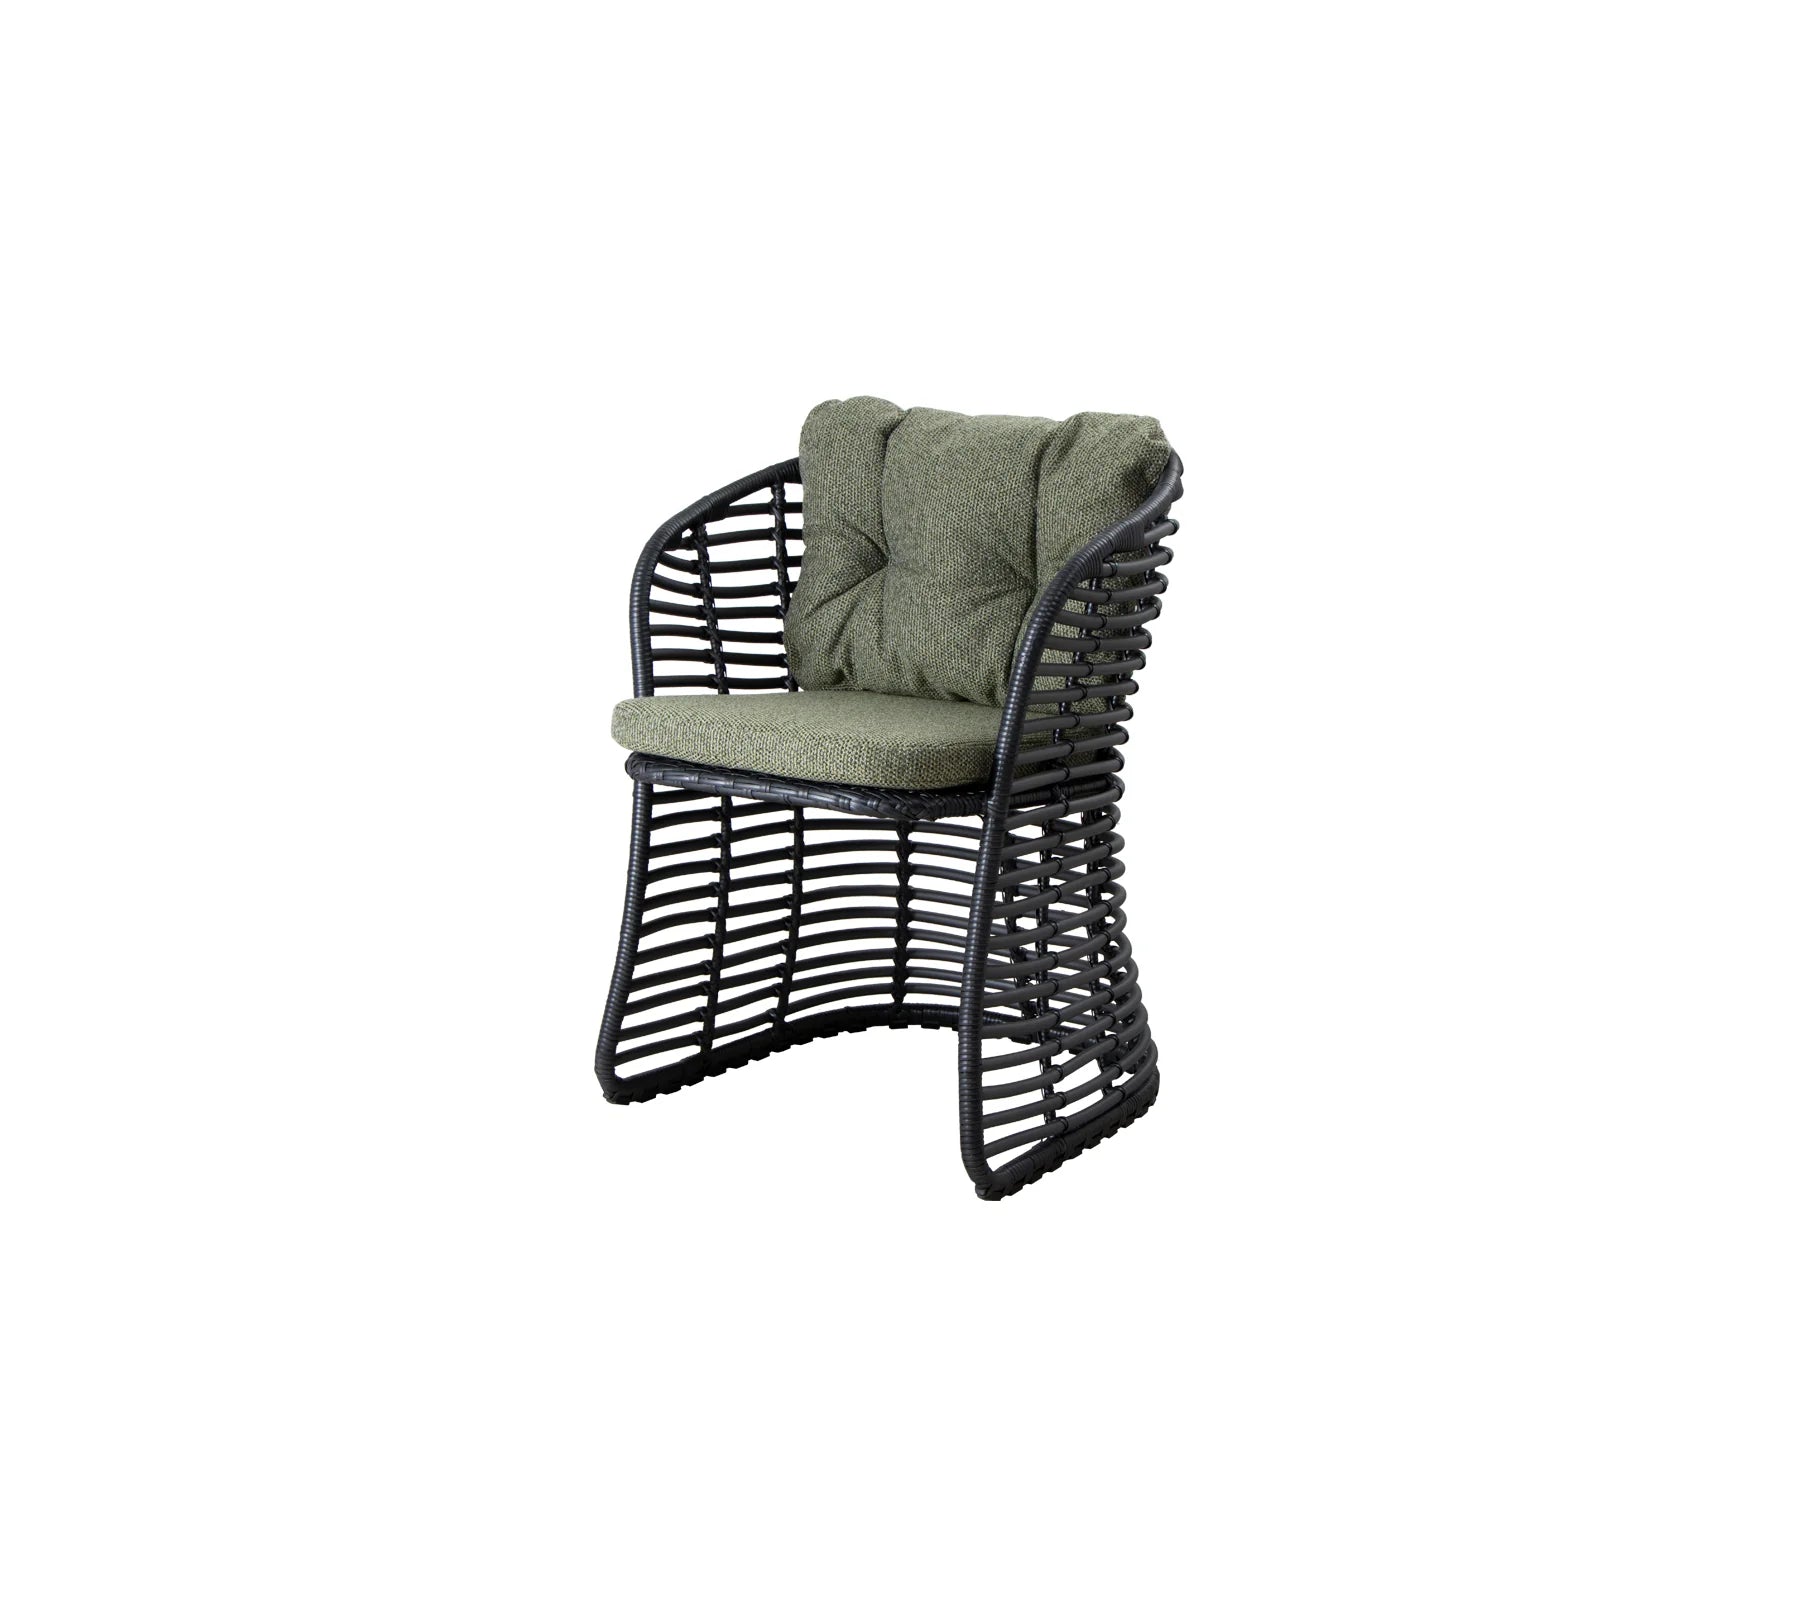 Boxhill's Basket Outdoor Dining Chair Graphite with Dark Green Cushion